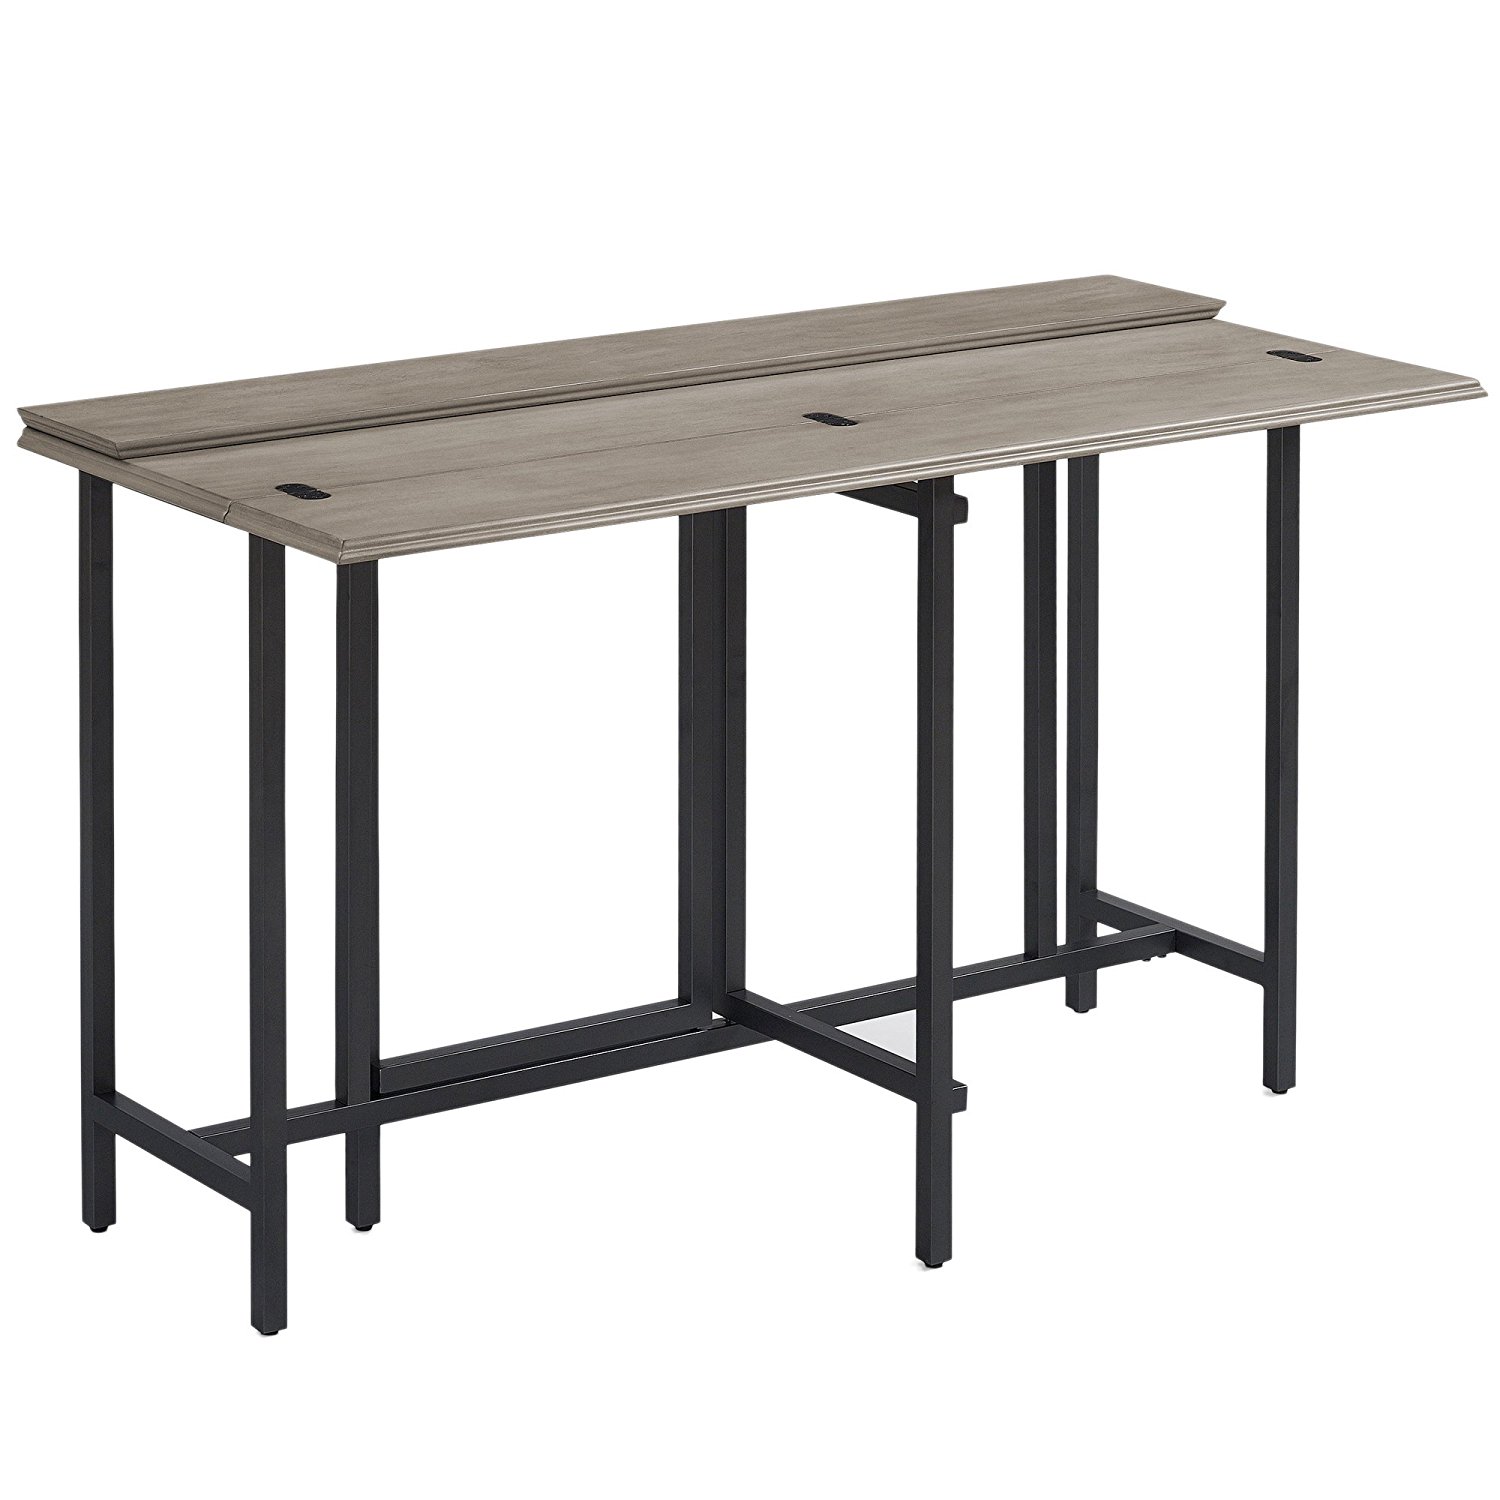 Convertible Dining Table Wood Contemporary Expandable Home Console Kitchen Table